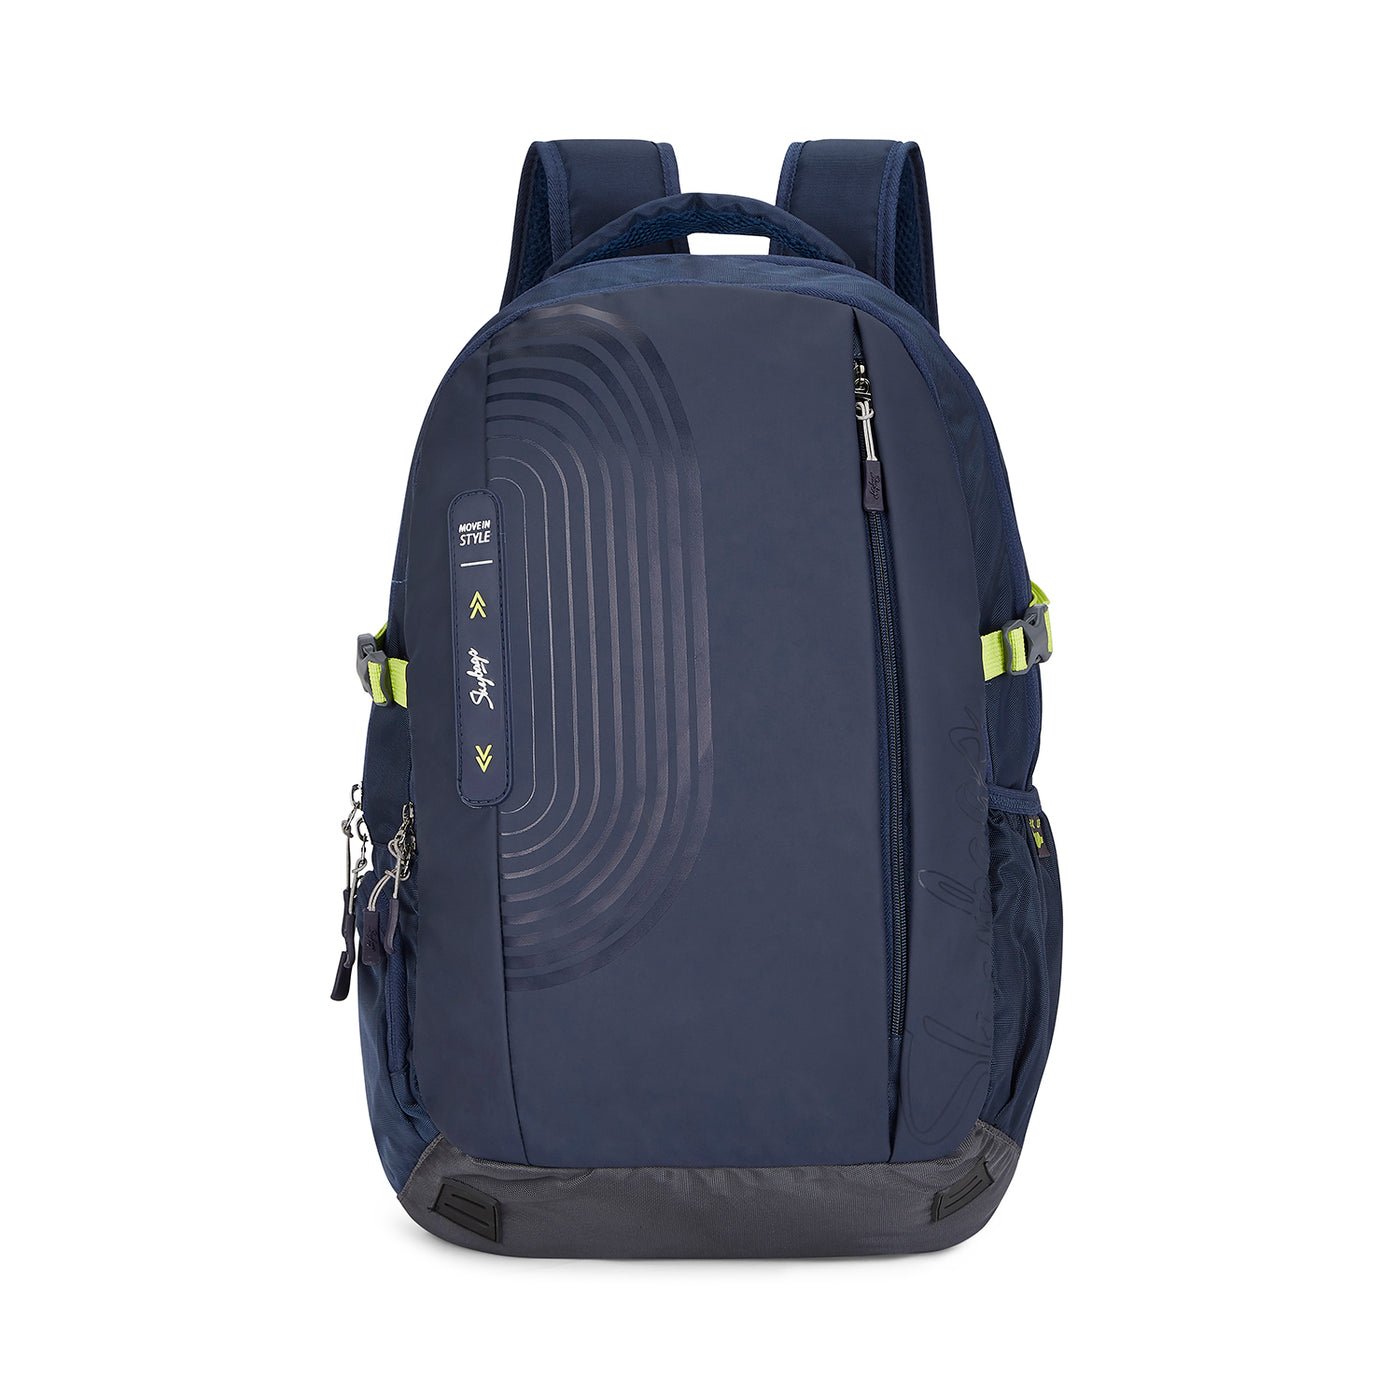 Skybags Xylo Plus 04 